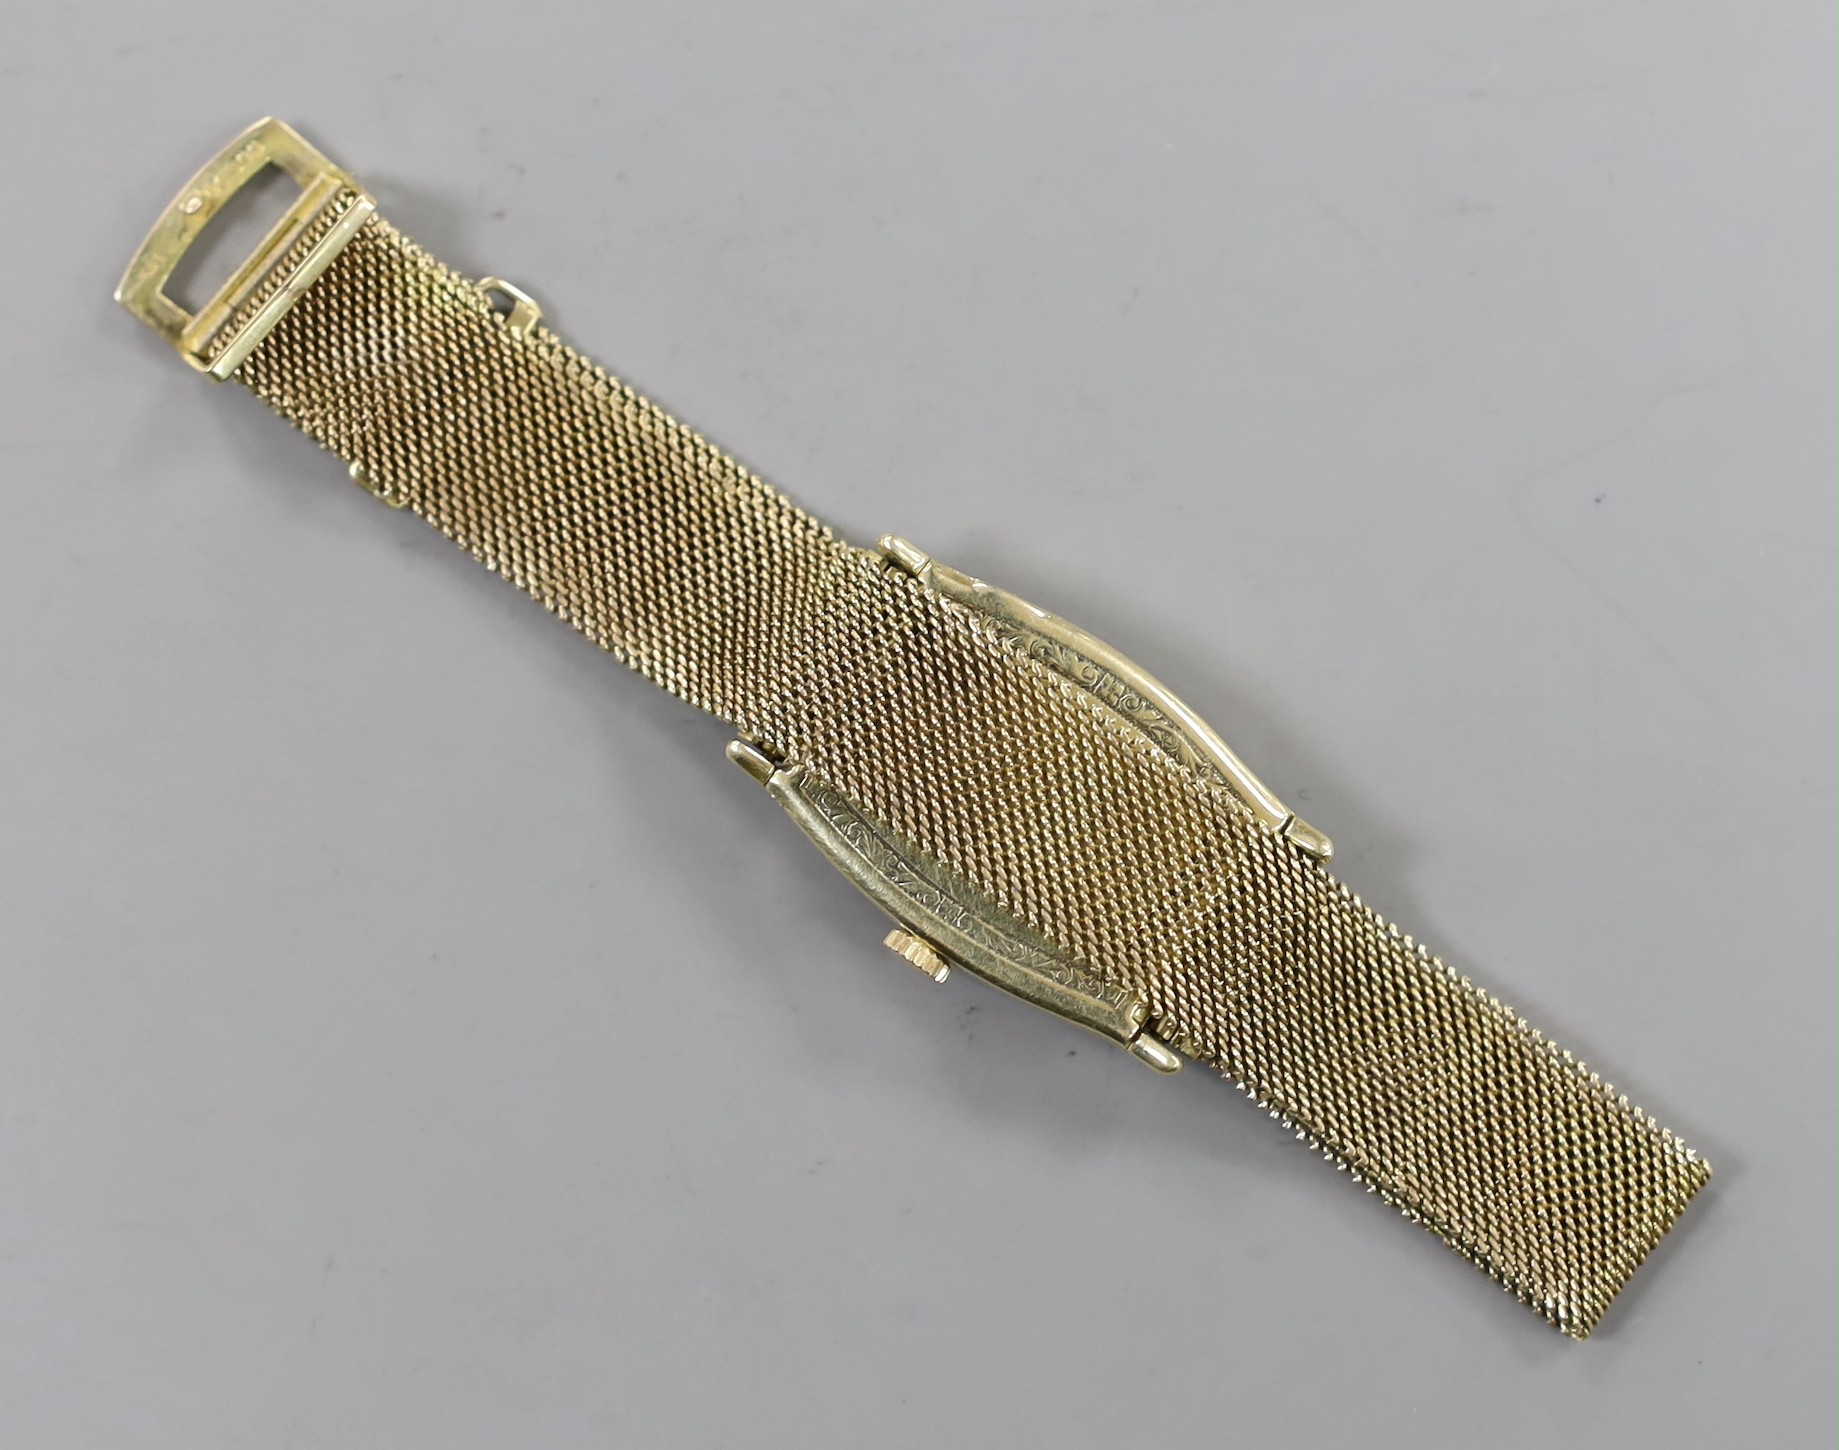 A gentleman's 14k tonneau shaped manual wind wrist watch, retailed by E. Cubelin, with Arabic dial and subsidiary seconds, on associated 9ct gold mesh link bracelet